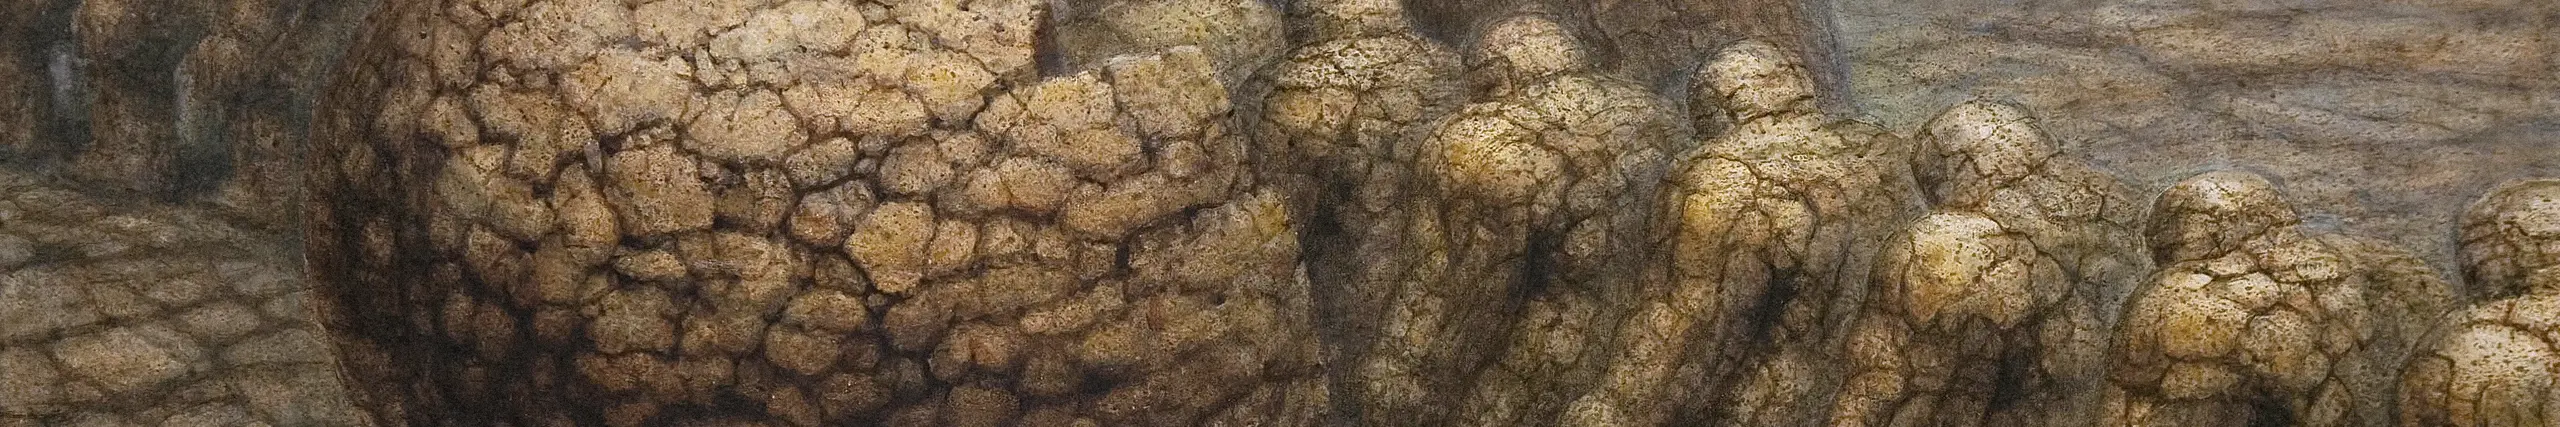 neolithic - new stone paintings from DE ES